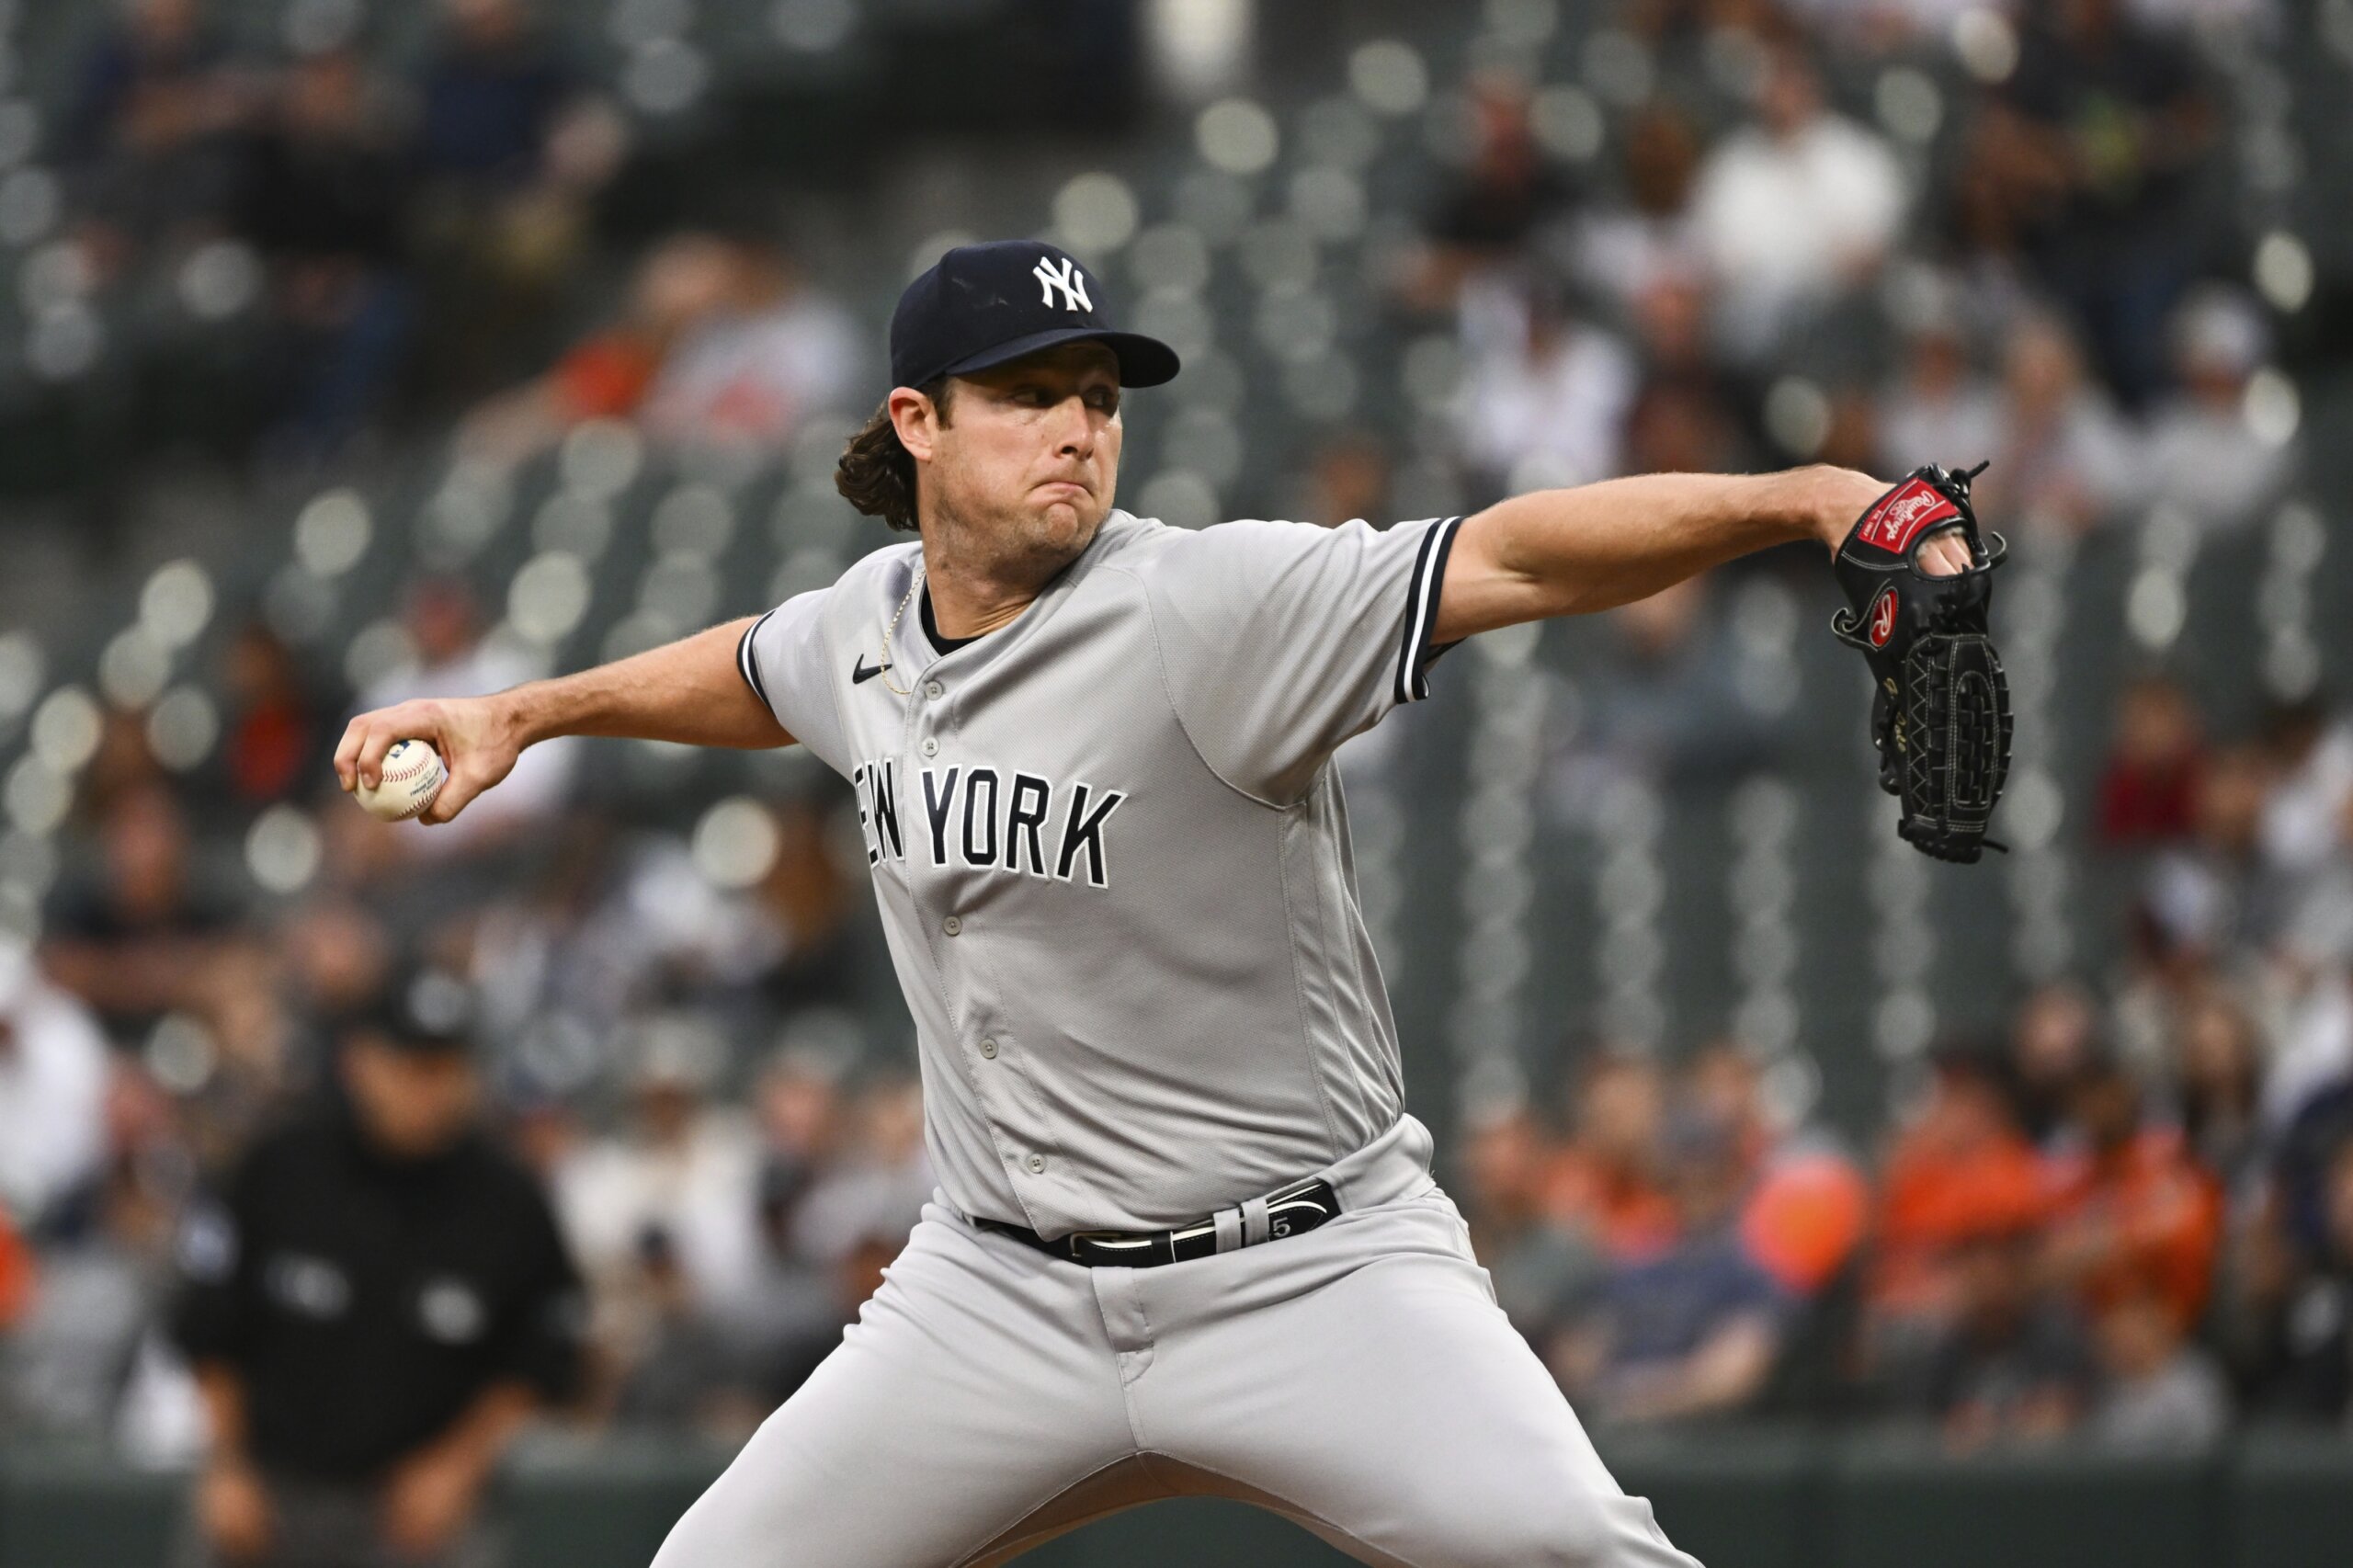 Yankees blanked for 2nd straight game, lose to Rays 4-0